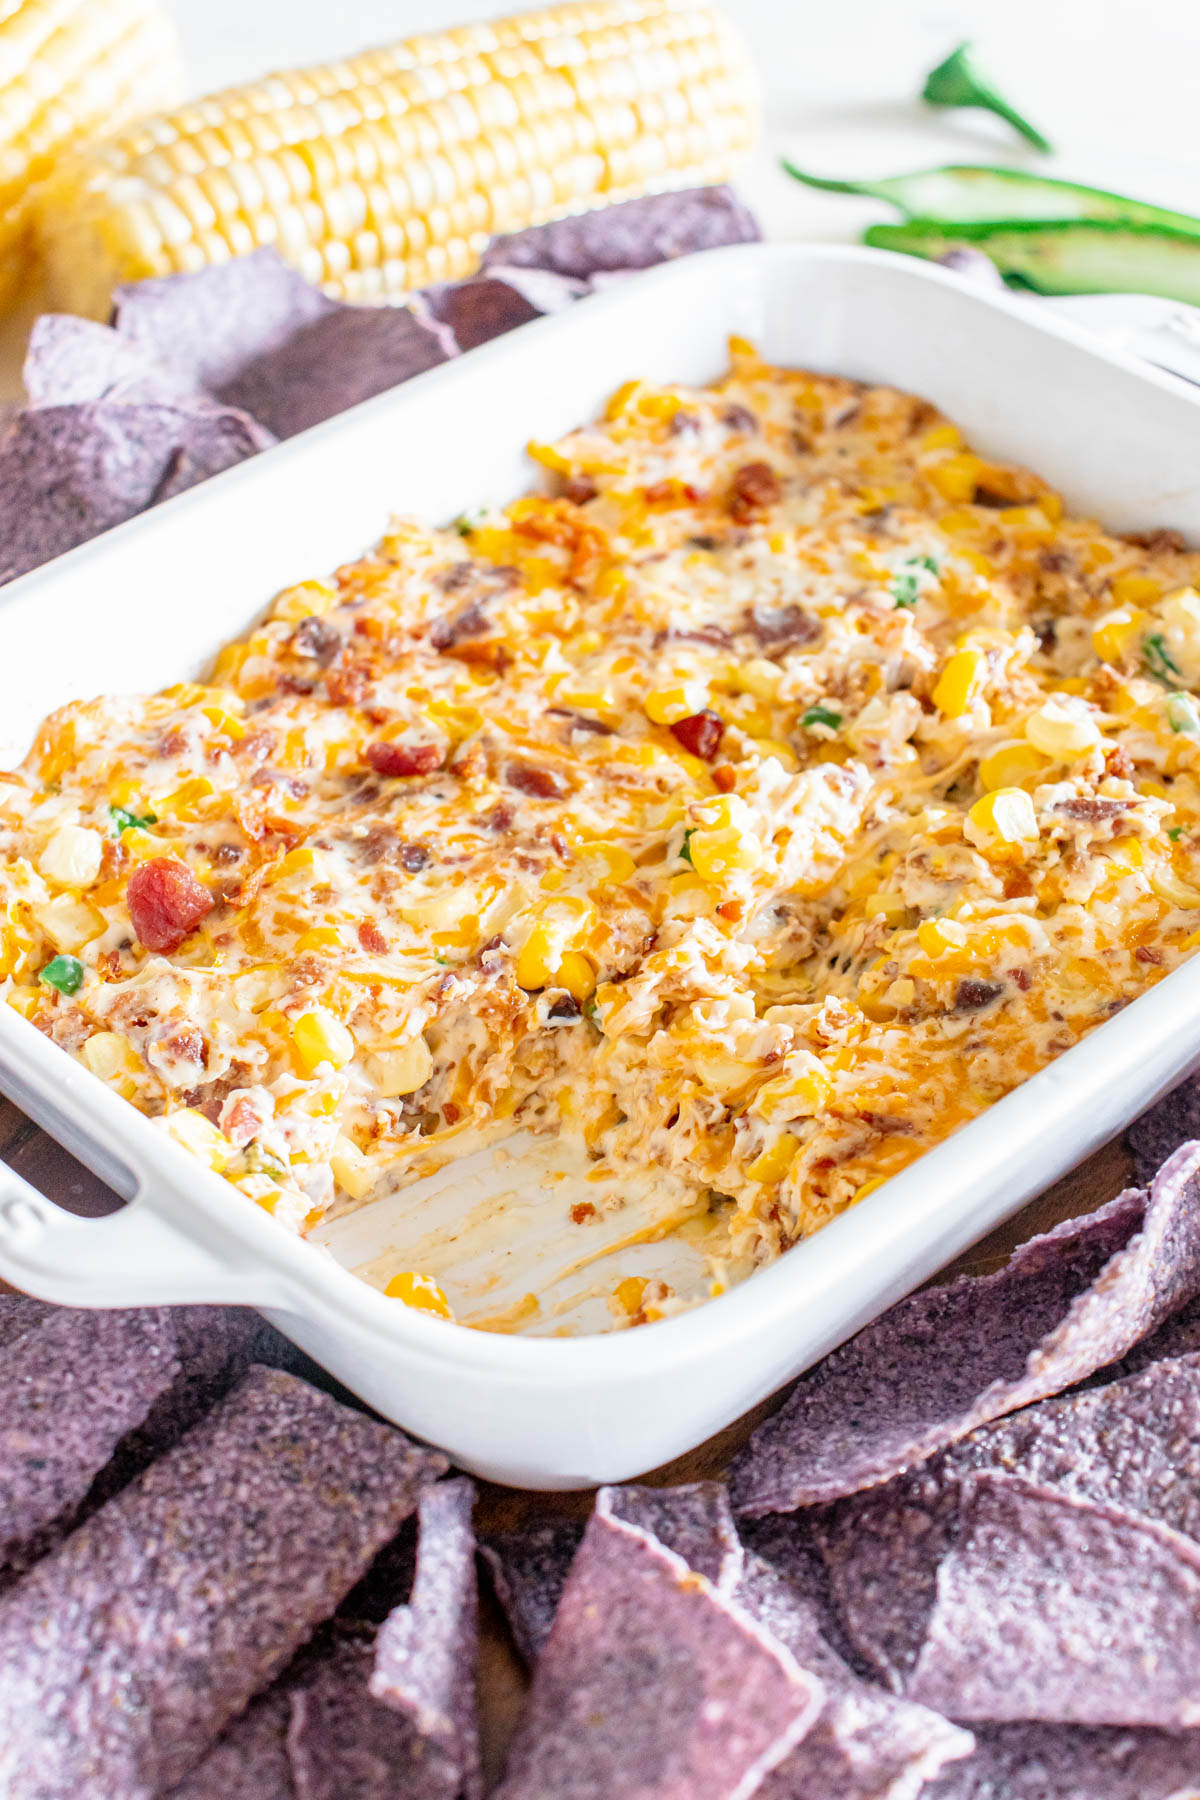 Cheesy corn dip in a white dish surrounded by tortilla chips.